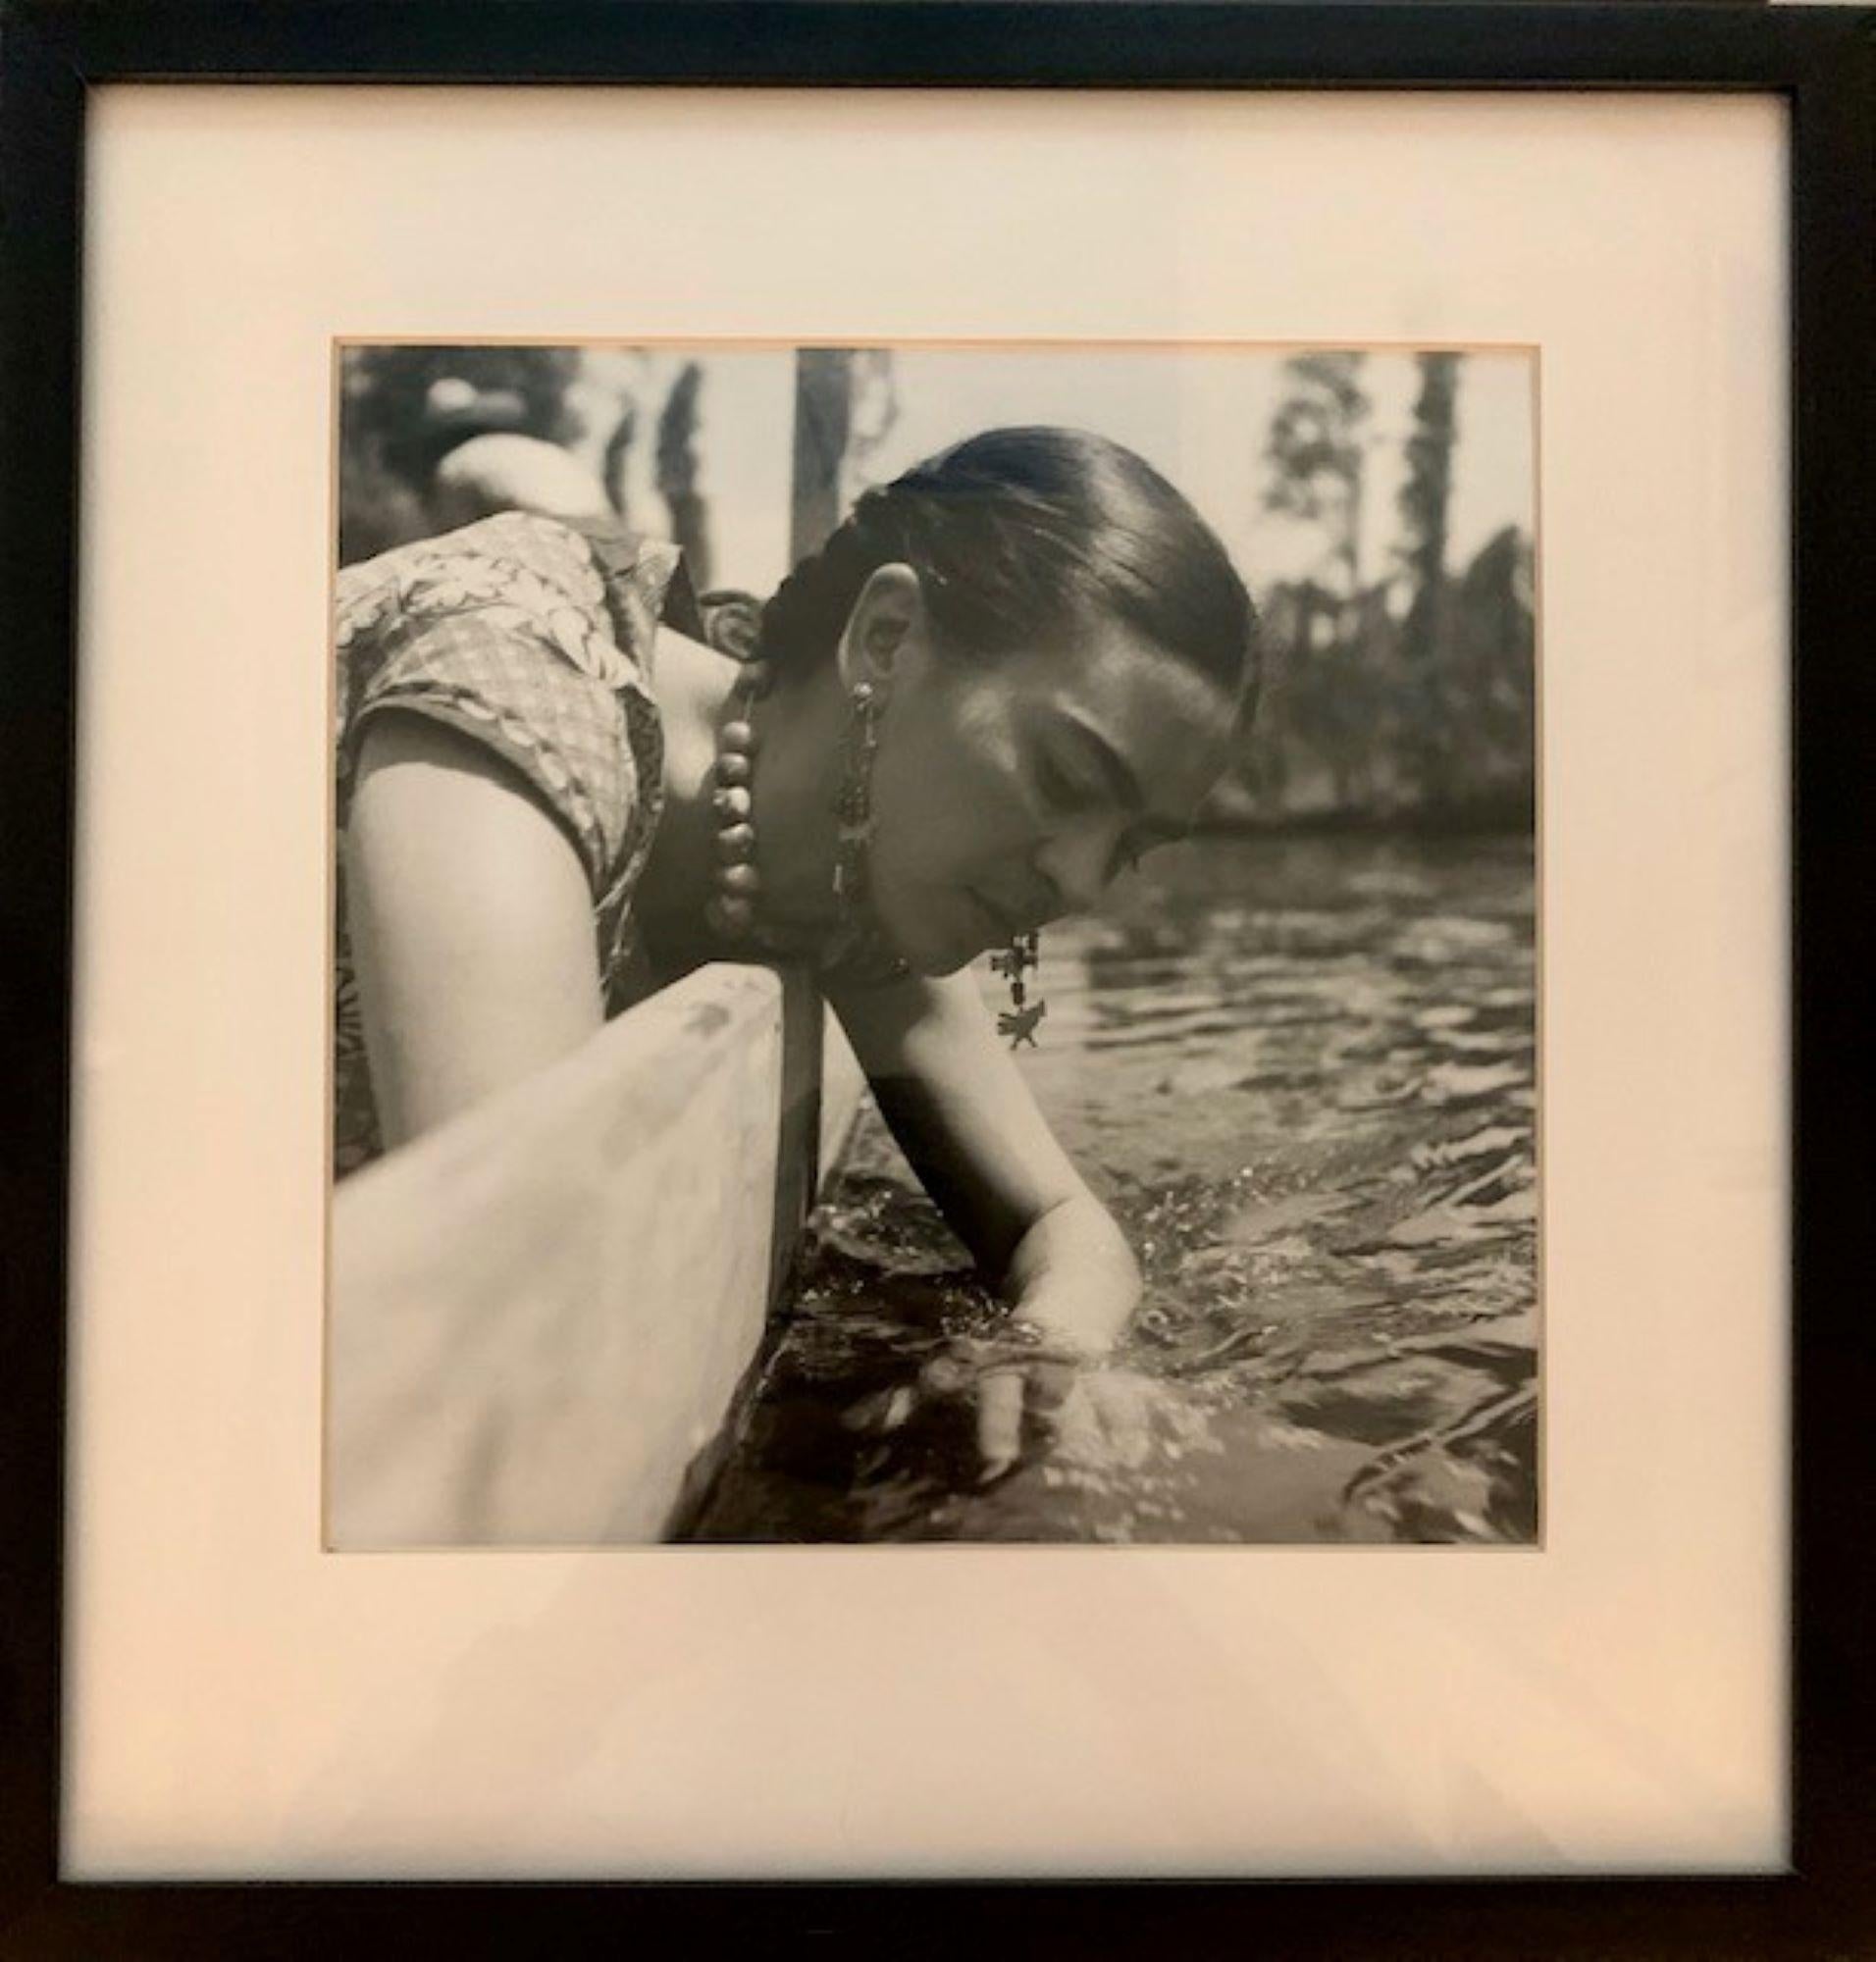 Frida Kahlo and the Pond  - Photograph by Fritz Henle